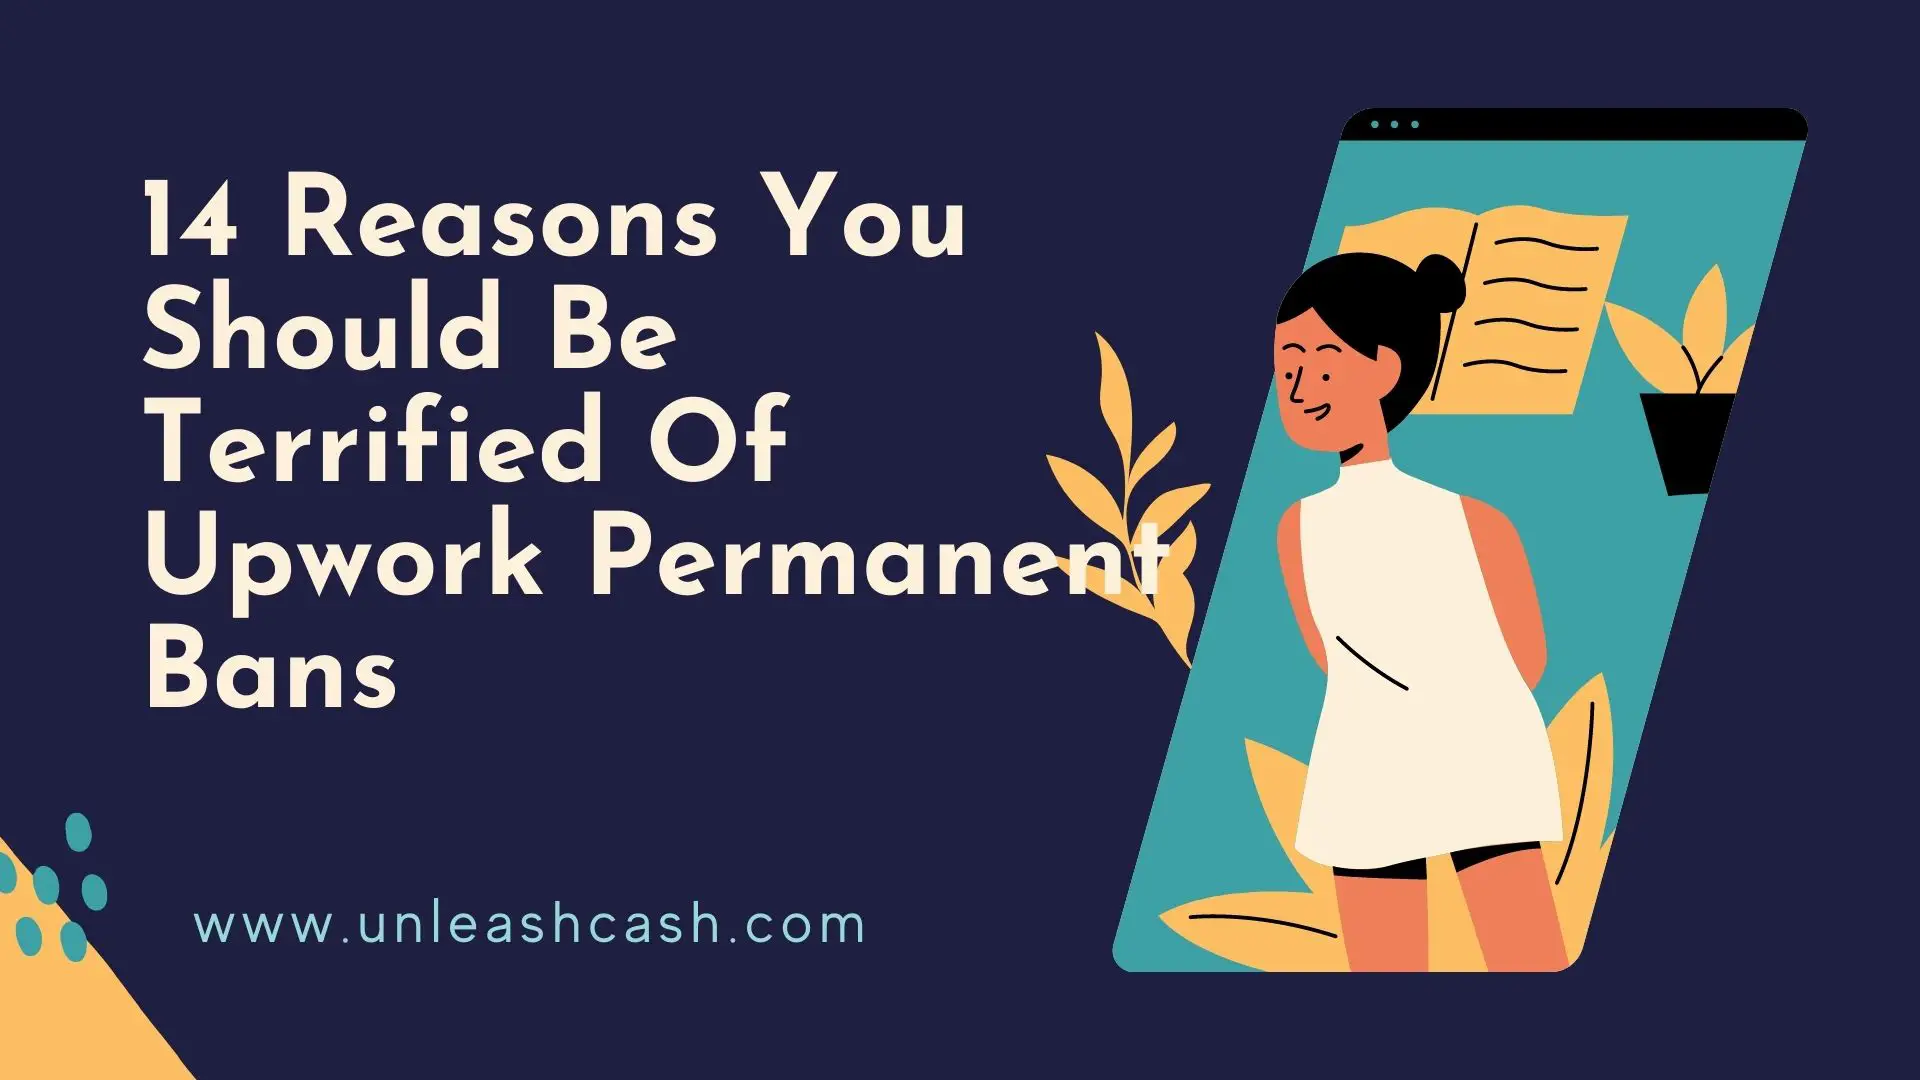 14 Reasons You Should Be Terrified Of Upwork Permanent Bans